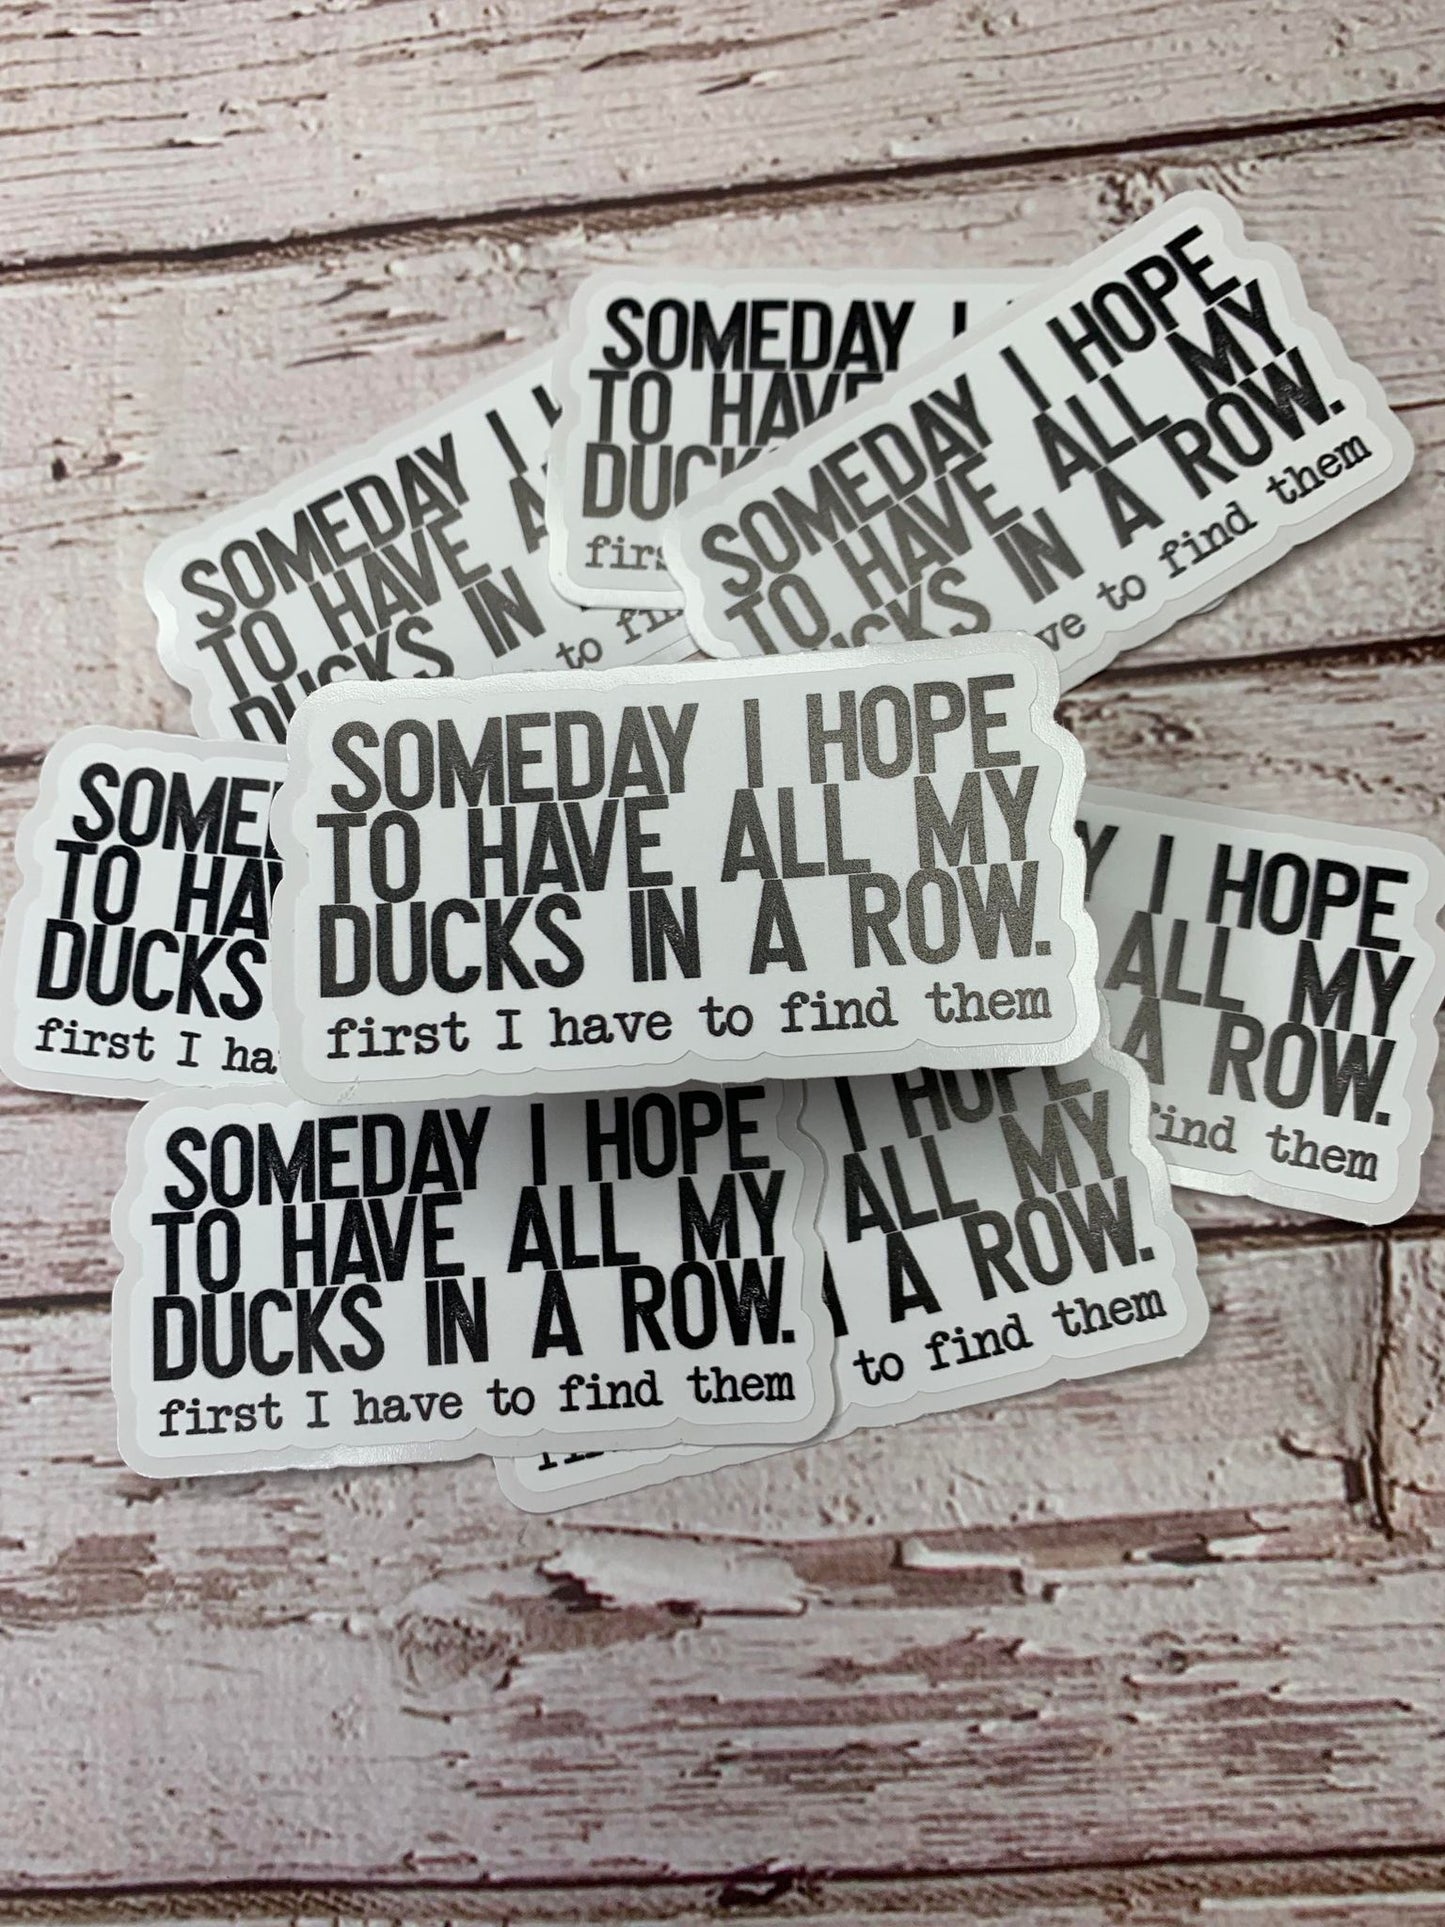 S44 Someday I hope to have all my ducks diecut